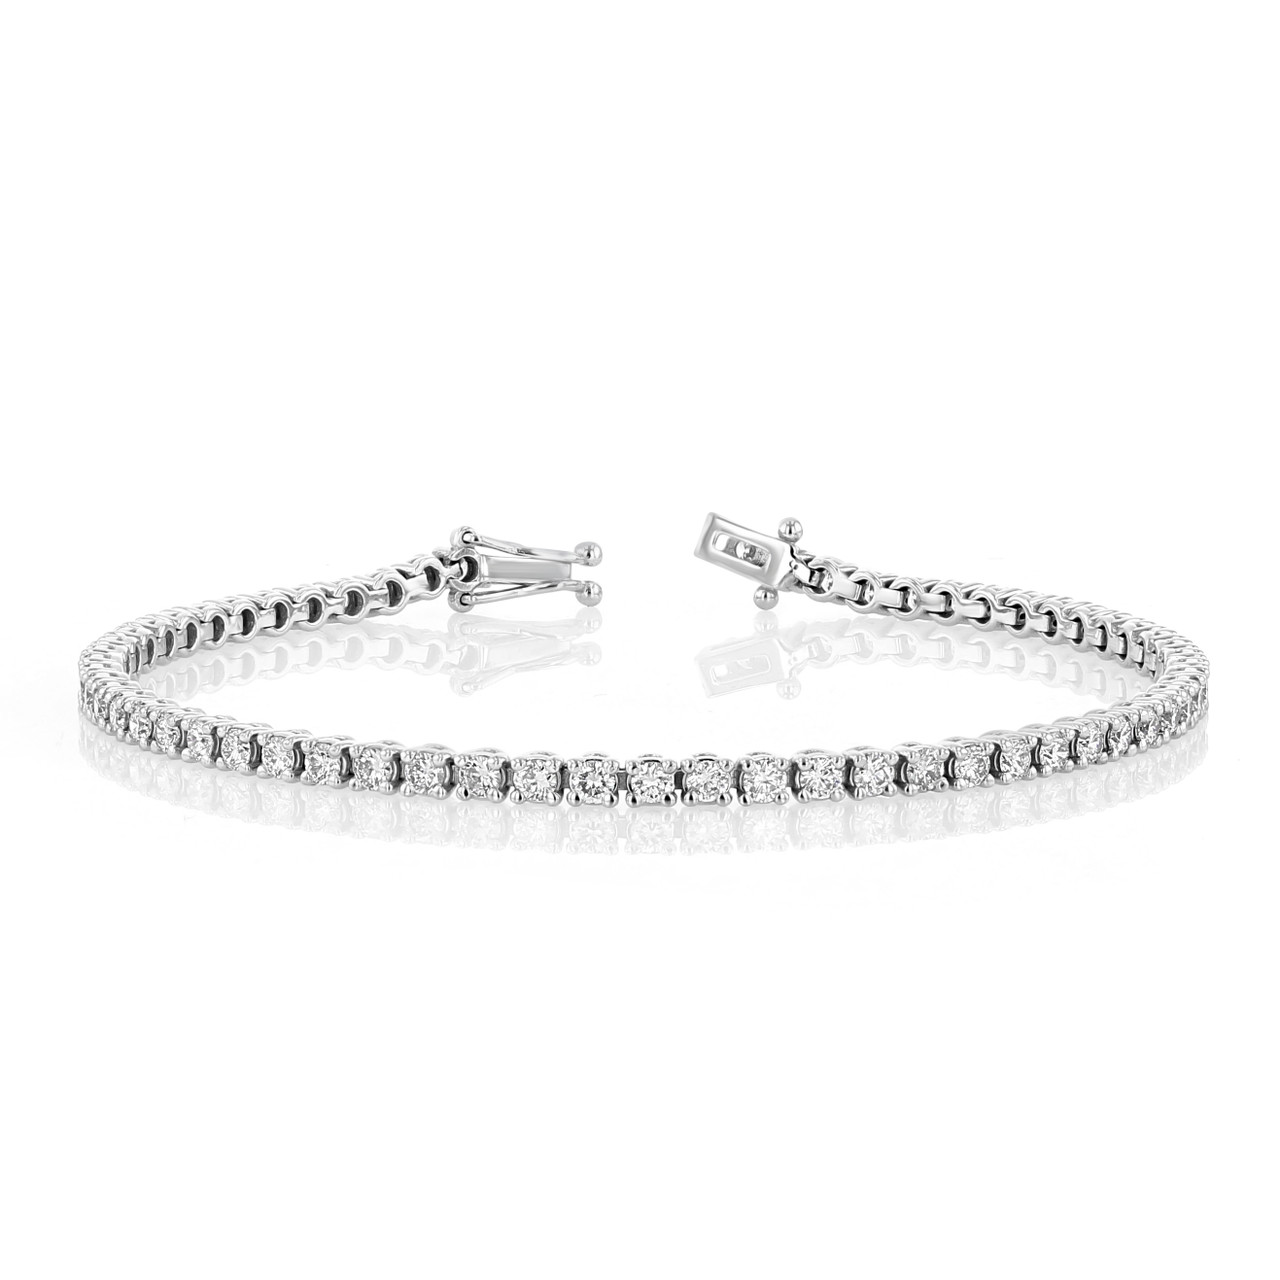 Platinum And Diamond Tennis Bracelet Available For